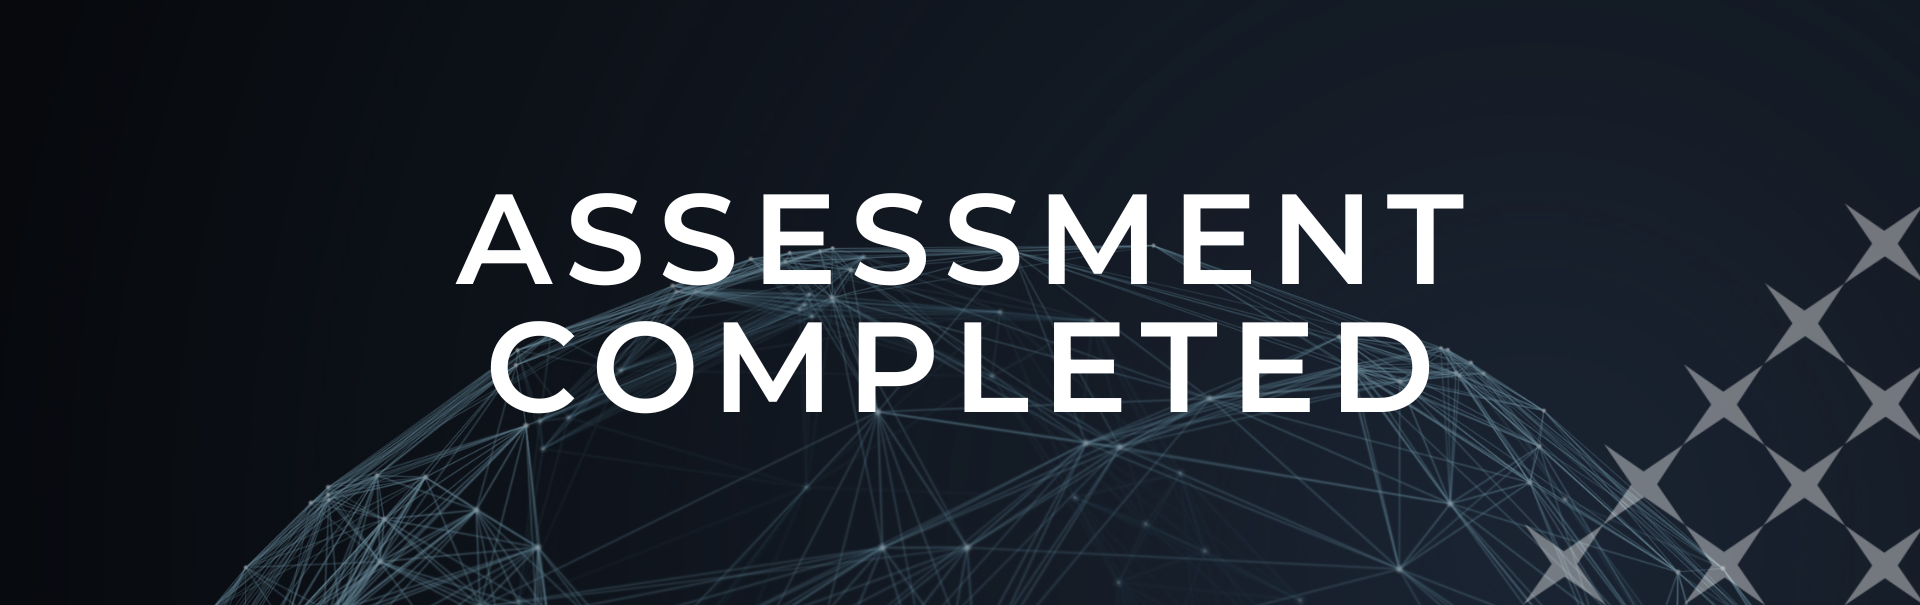 CLOUD BENEFITS OF vSPHERE+Assessment Completed